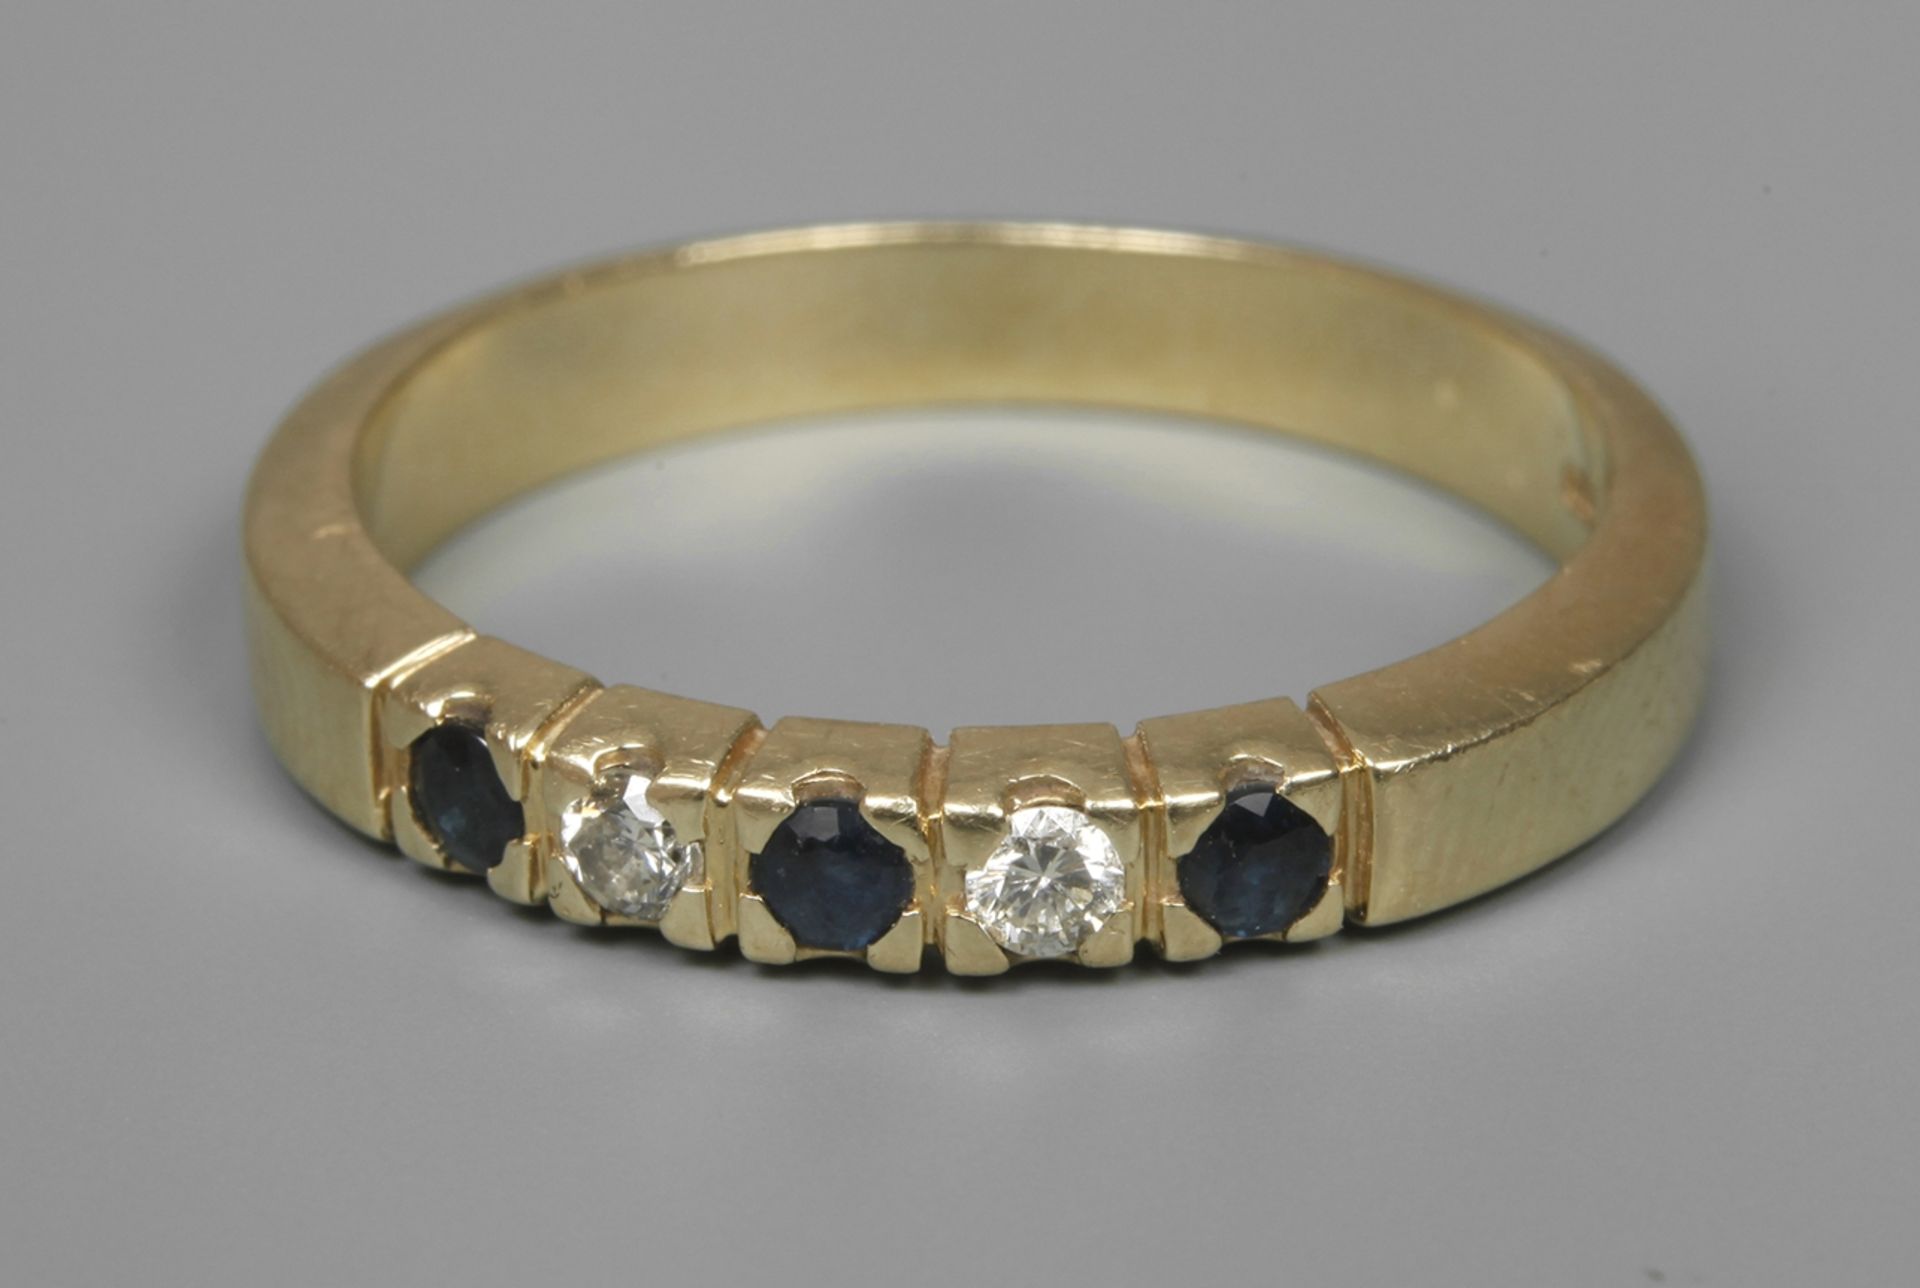 Band ring with sapphires and diamonds